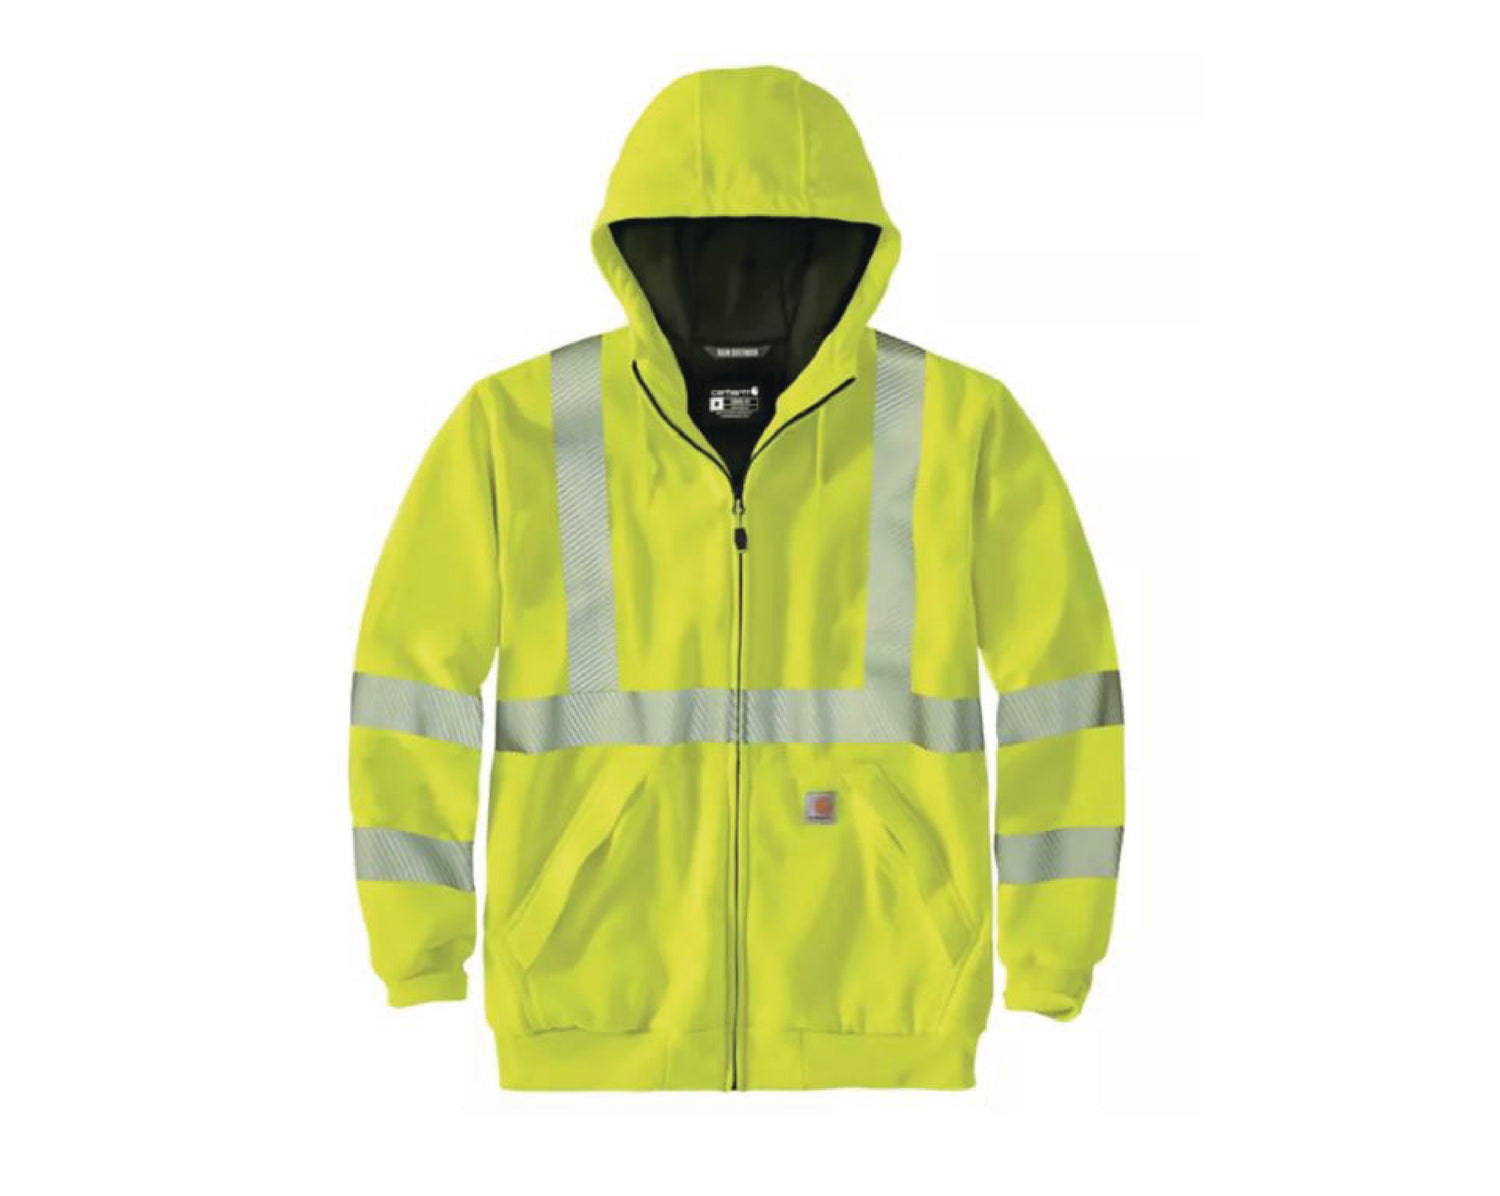 HIGH-VISIBILITY RAIN DEFENDER® LOOSE FIT MIDWEIGHT THERMAL LINED FULL ZIP CLASS 3 SWEATSHIRT, 104988 - Cable Connection & Supply Company Inc.